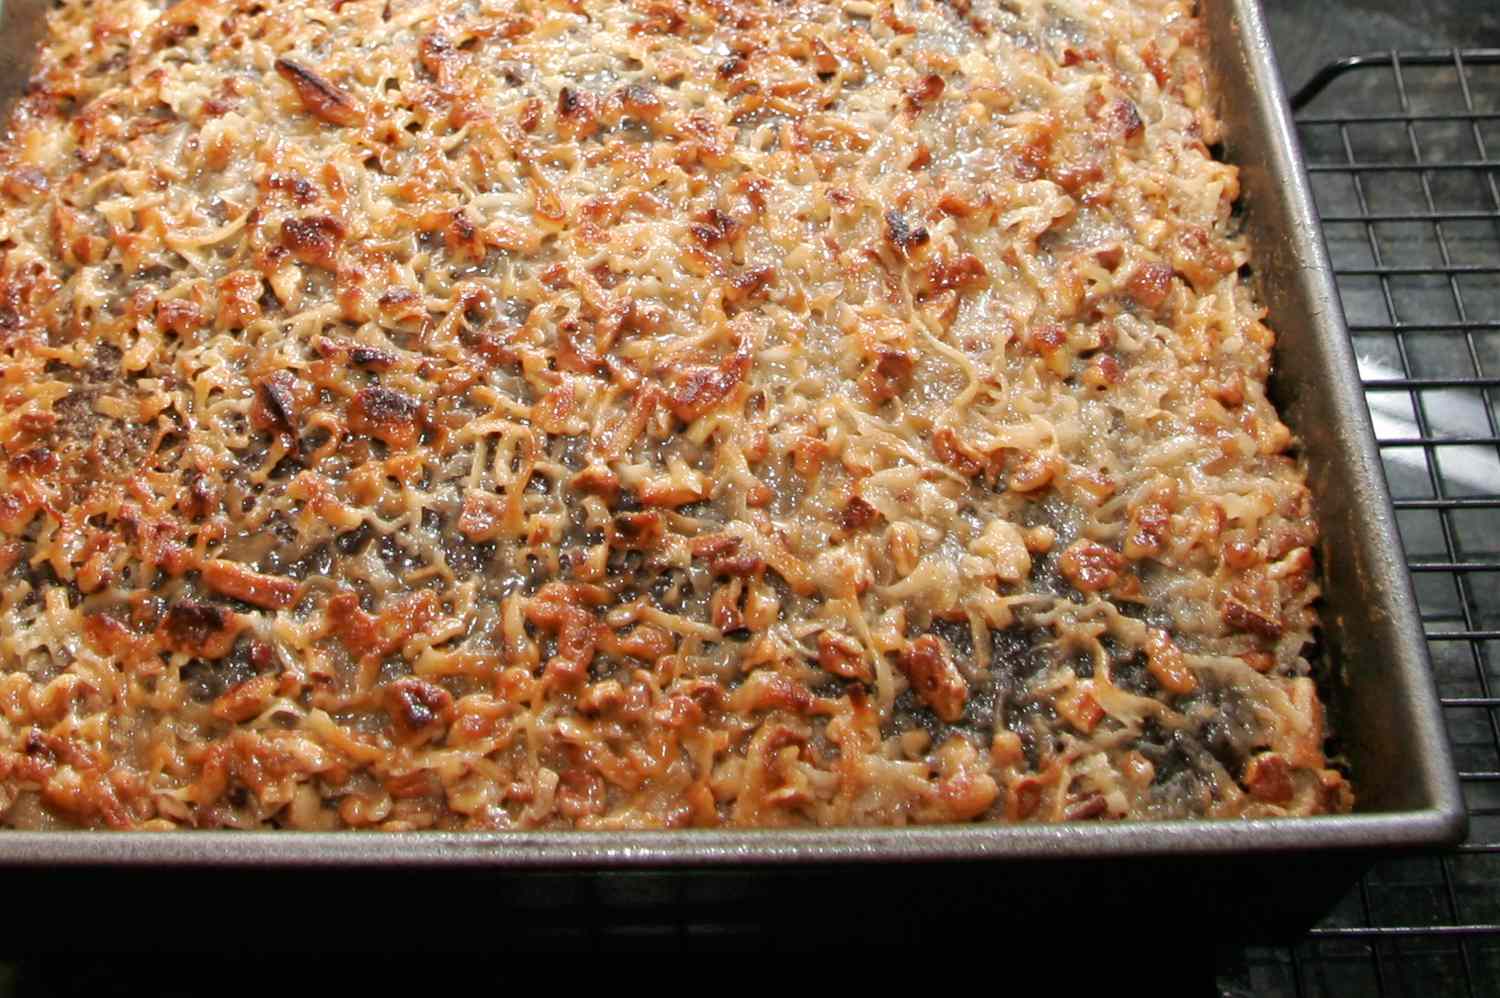 Broiled Coconut Topping Recipes